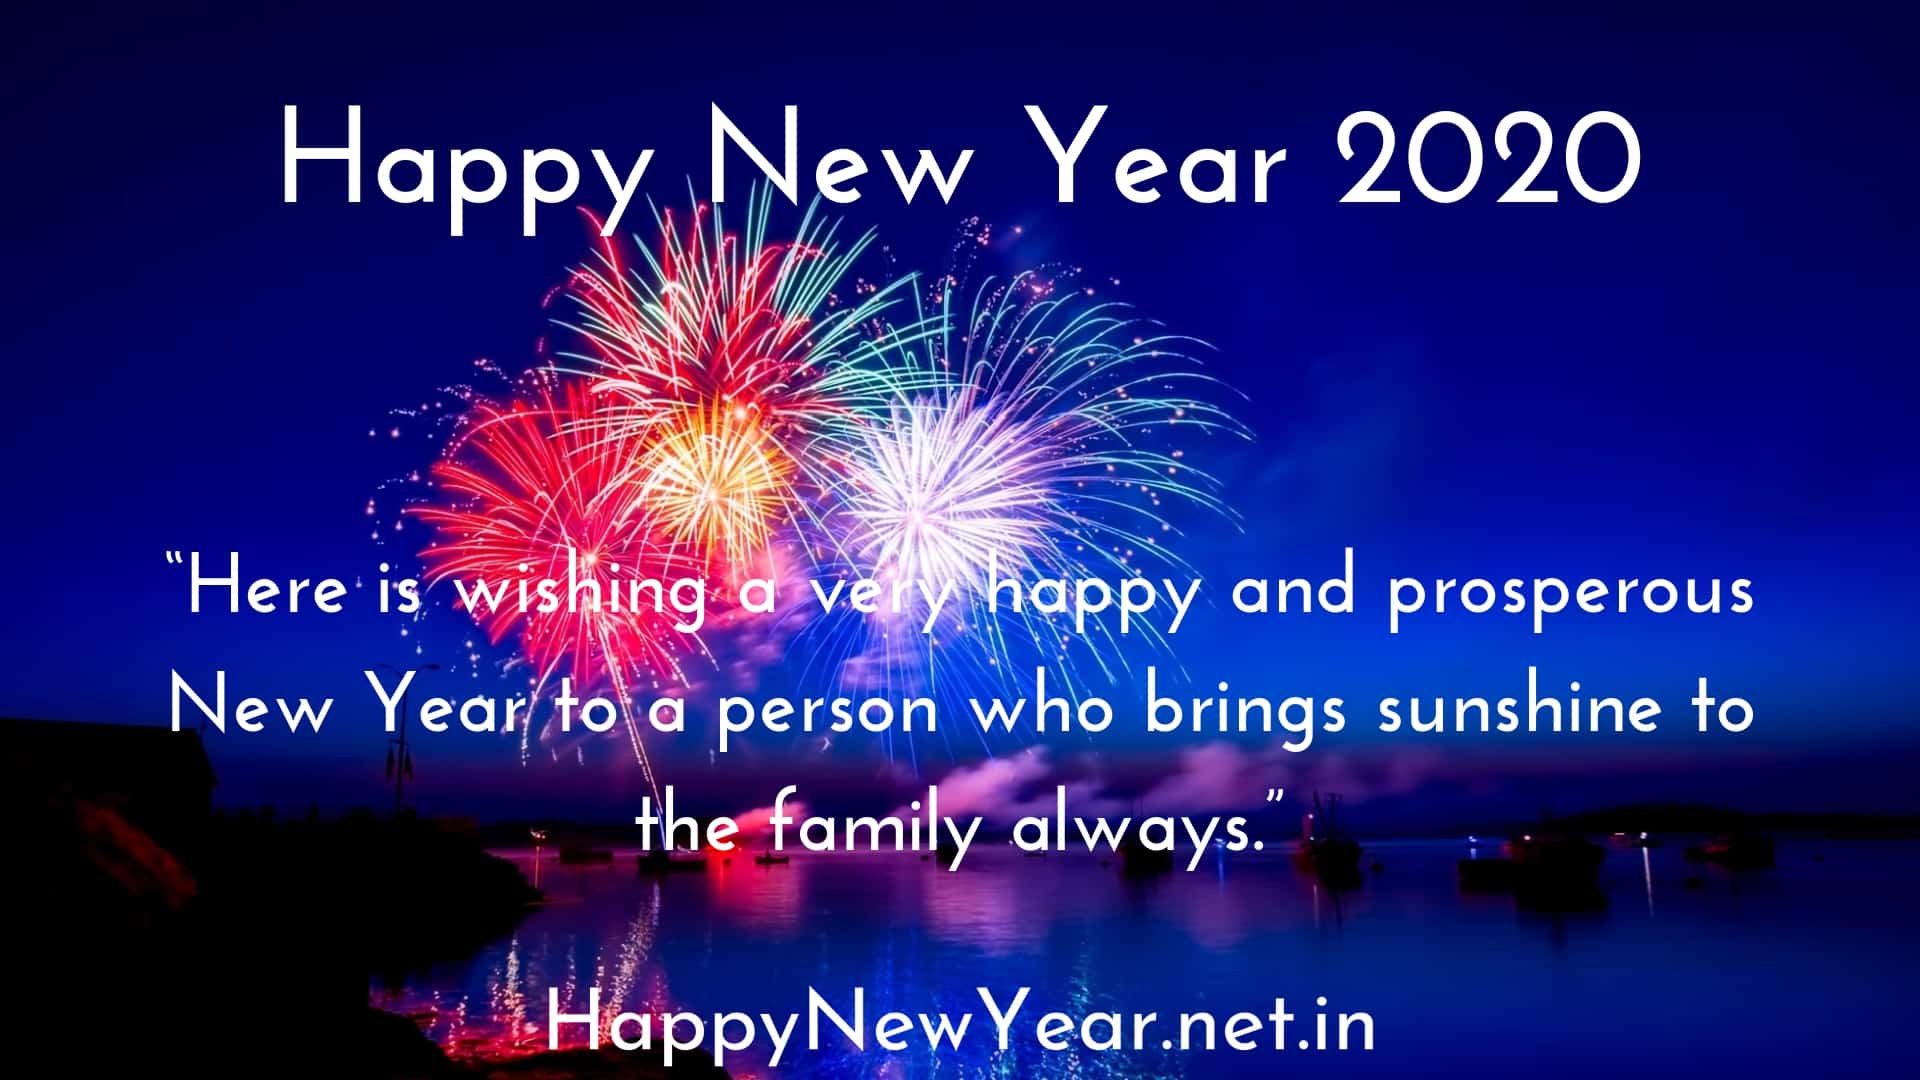 New Year 2020 Image & Picture Download. Happy New Year 2020